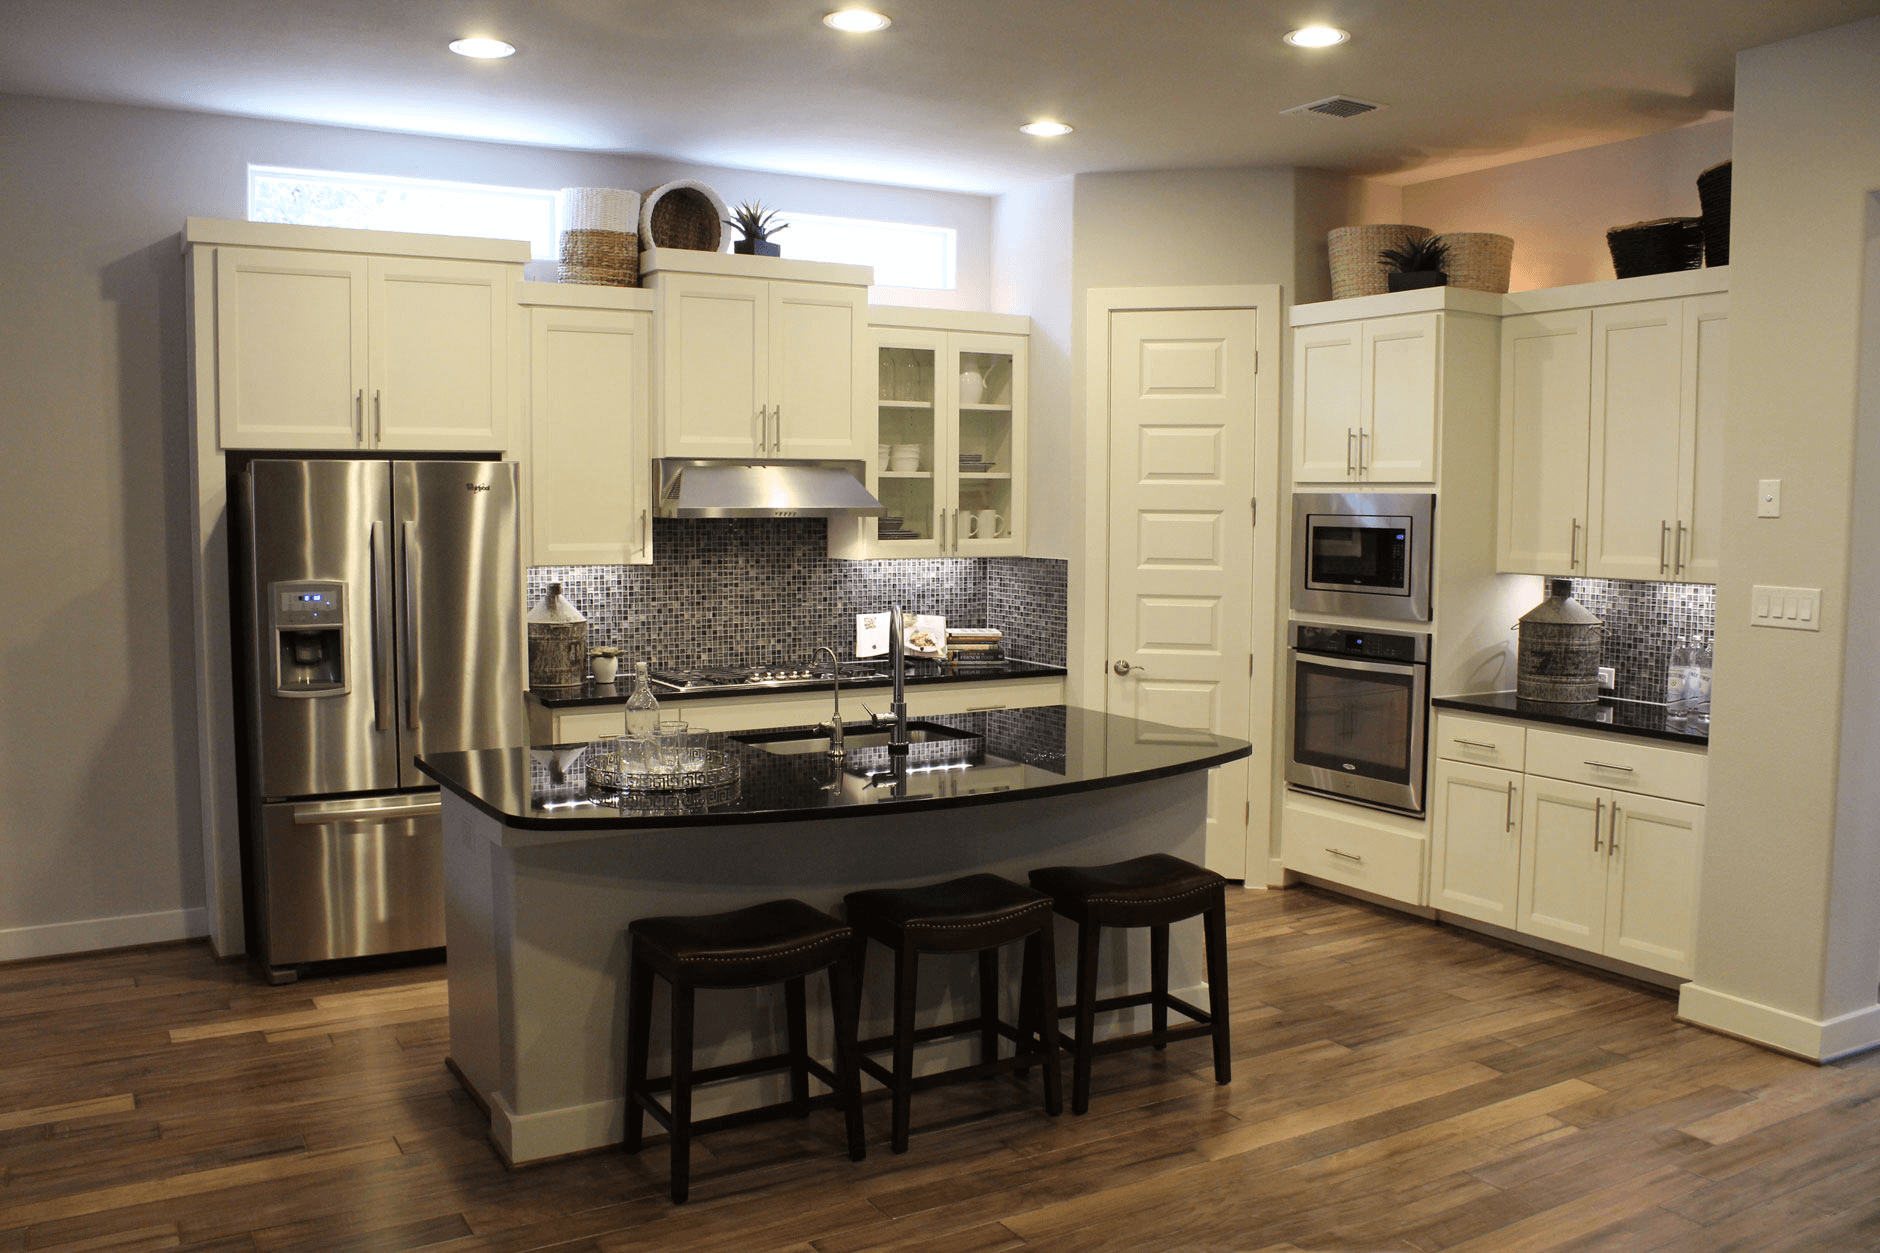 Match Your Countertop With Kitchen Cabinets, How To Match Countertops With Cabinets